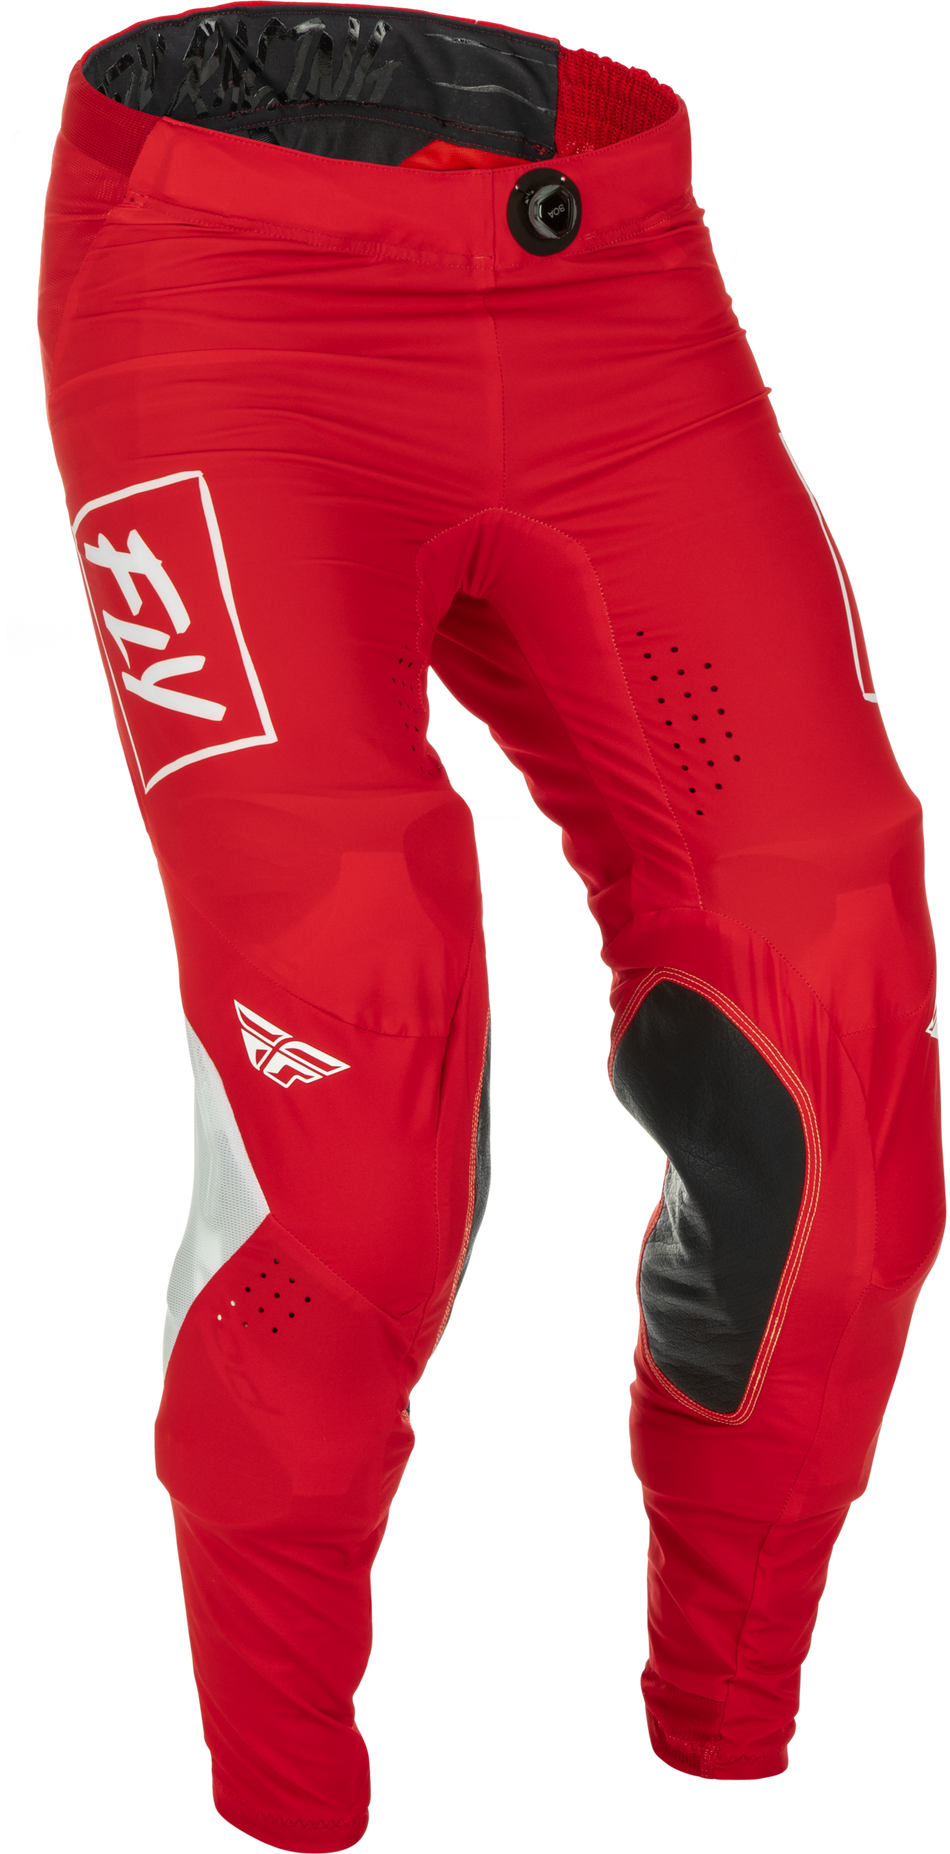 FLY RACING Lite Pants Red/White Size 32 375-73232